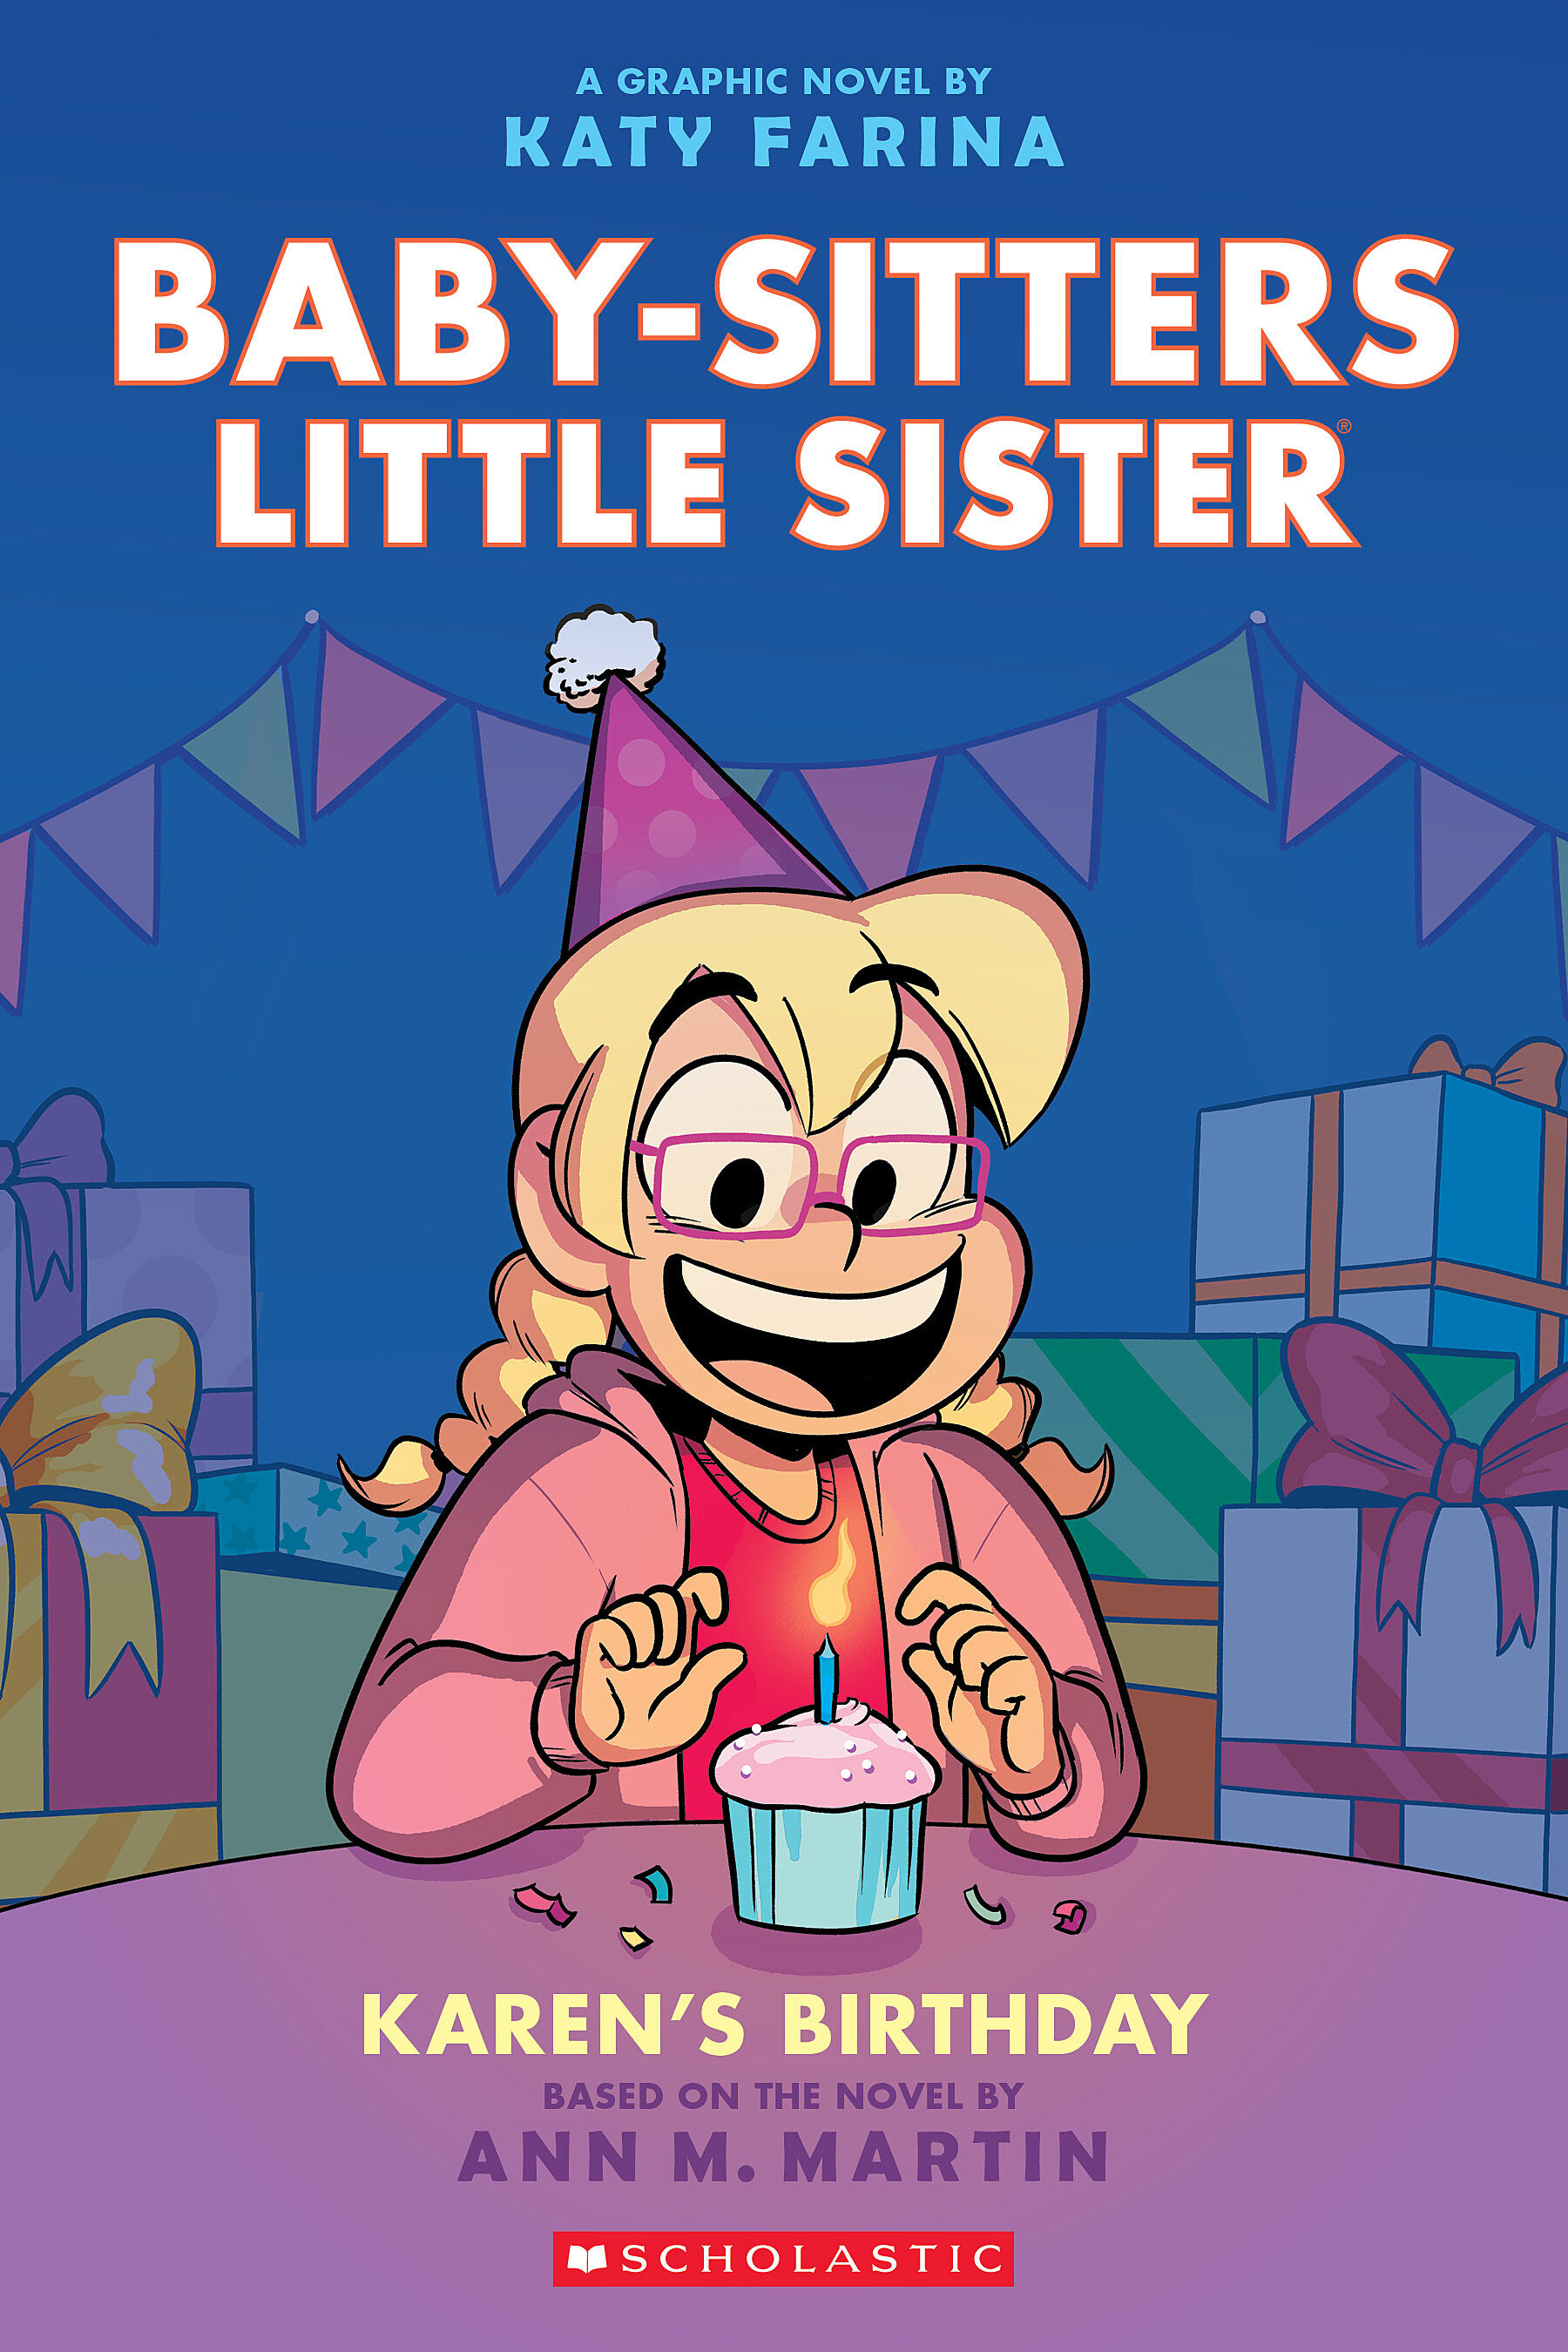 Karen's Birthday: A Graphic Novel (Baby-sitters Little Sister #6) cover image